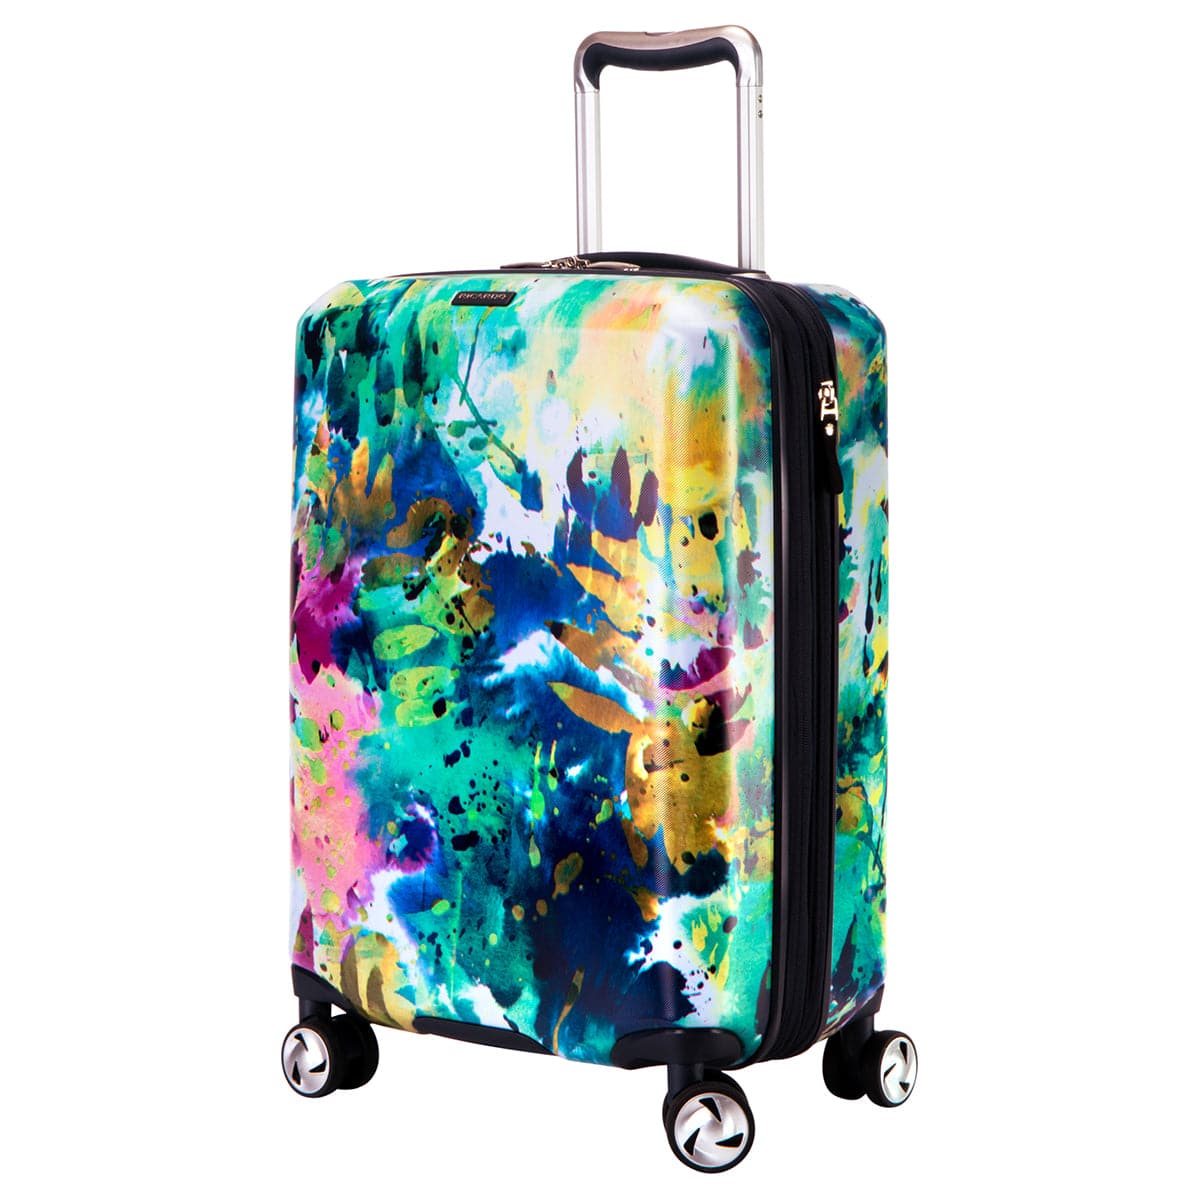 Ricardo Beverly Hills Beaumont Carry-On Luggage